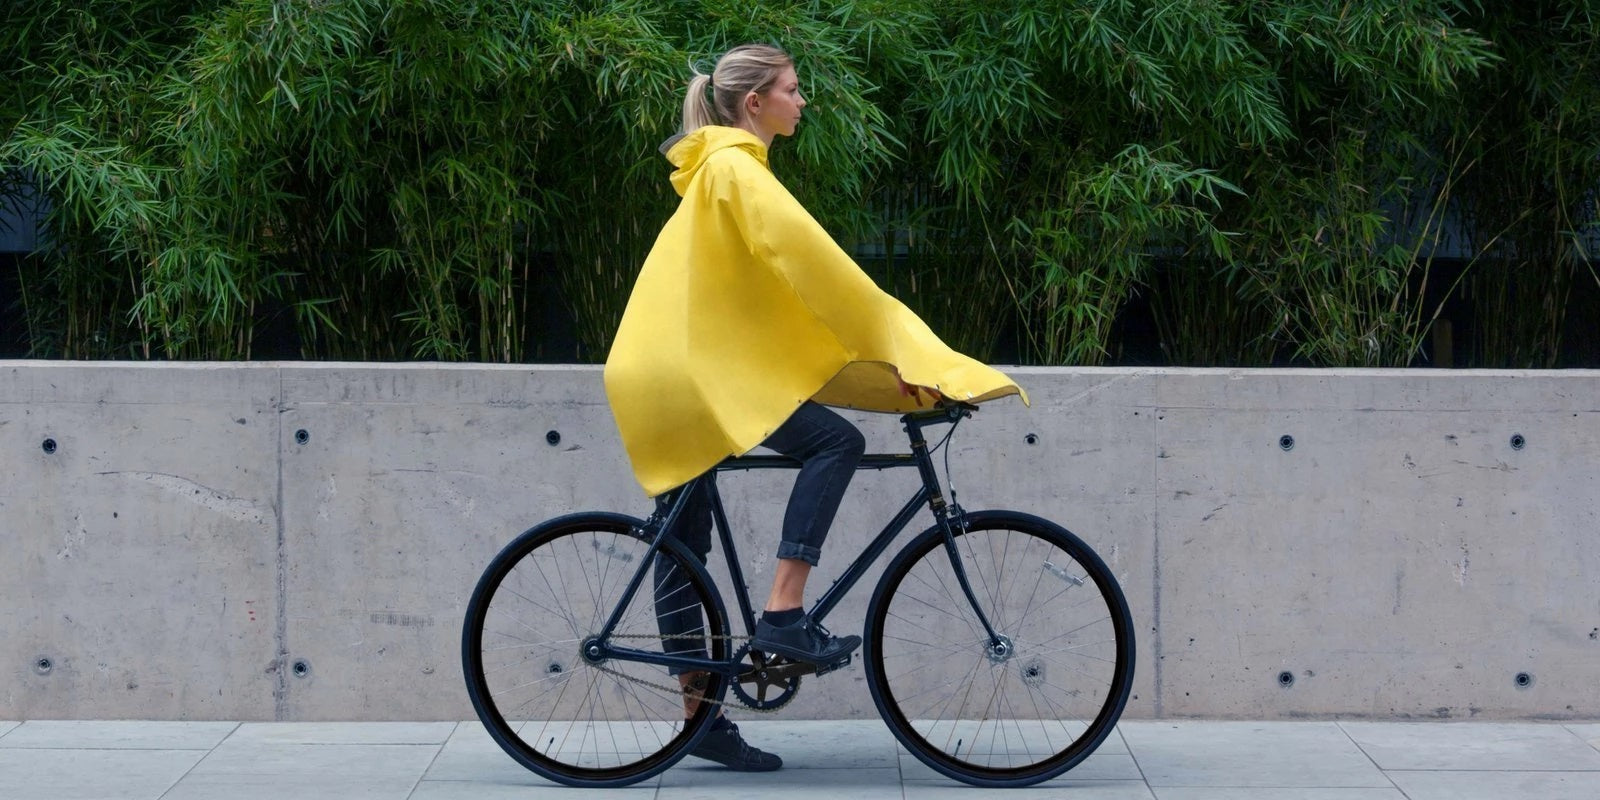 "more than just a superhero cape" - Total Women Cycling